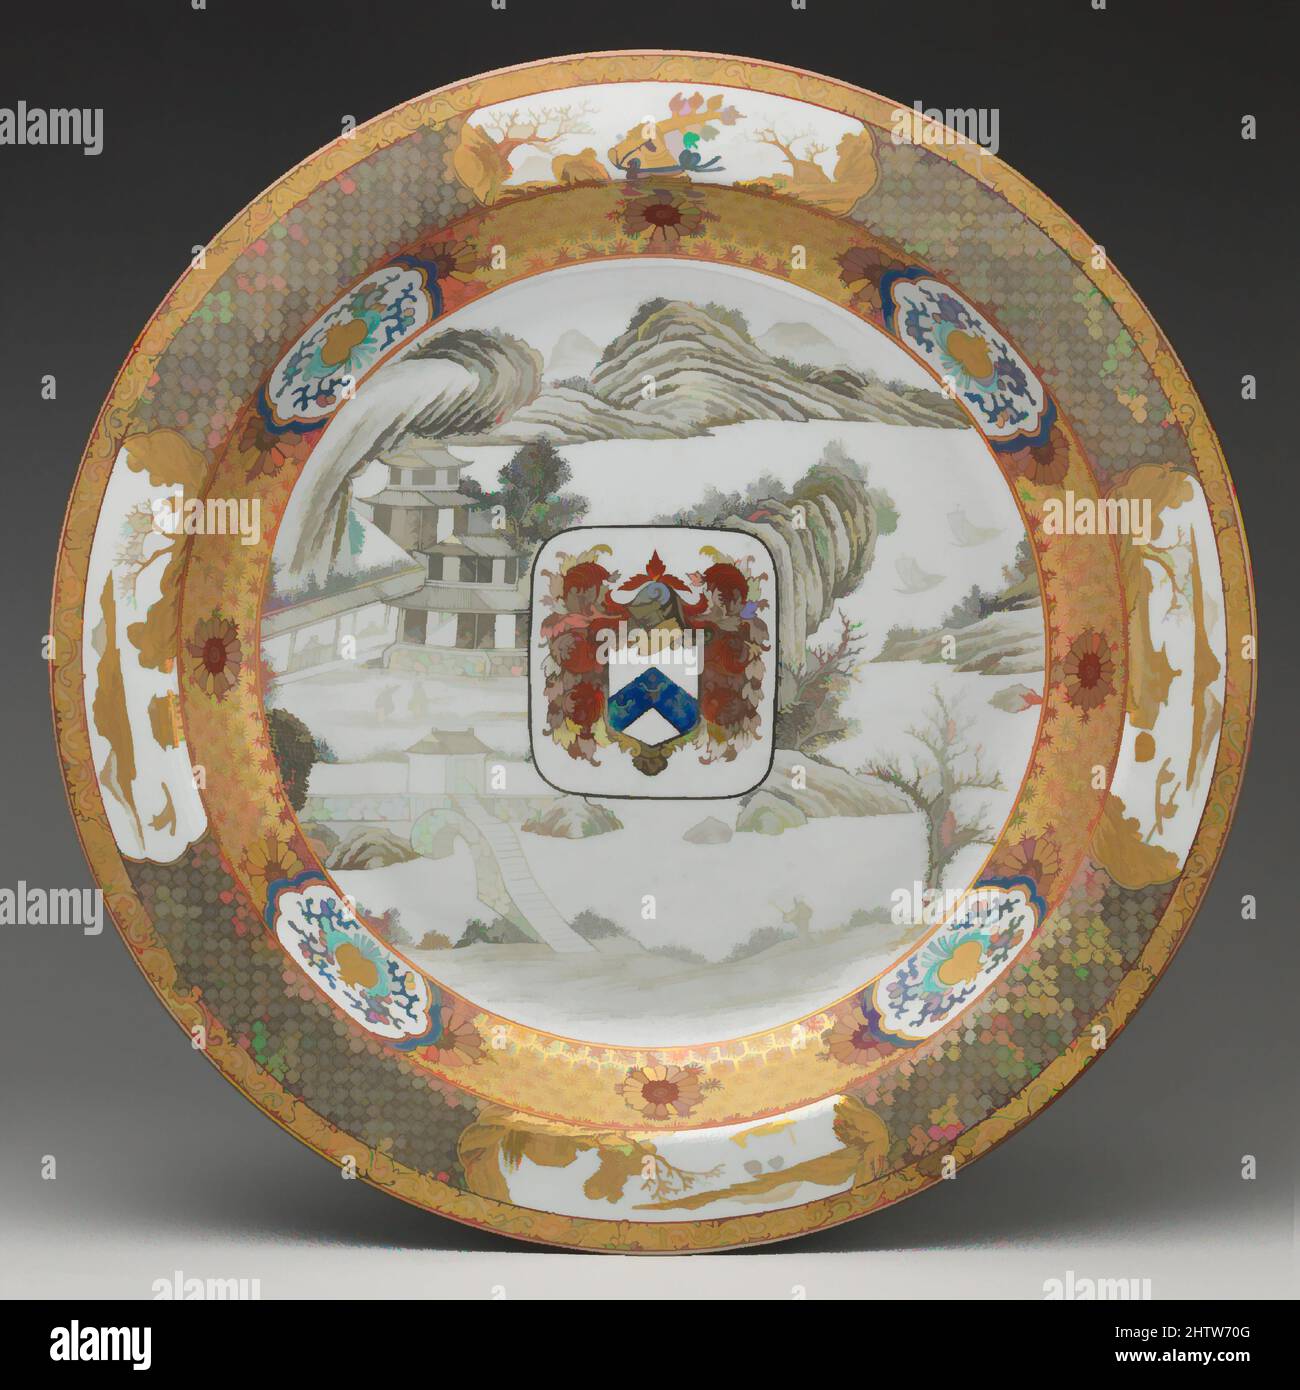 Art inspired by Plate, 1725–30, Chinese, for British market, Hard-paste porcelain, Overall: 2 3/8 × 15 1/4 in. (6 × 38.7 cm), Ceramics-Porcelain-Export, This dish is part of a service made for John Elwick of Cornhill, London (died 1730), who was a director of the English East India, Classic works modernized by Artotop with a splash of modernity. Shapes, color and value, eye-catching visual impact on art. Emotions through freedom of artworks in a contemporary way. A timeless message pursuing a wildly creative new direction. Artists turning to the digital medium and creating the Artotop NFT Stock Photo